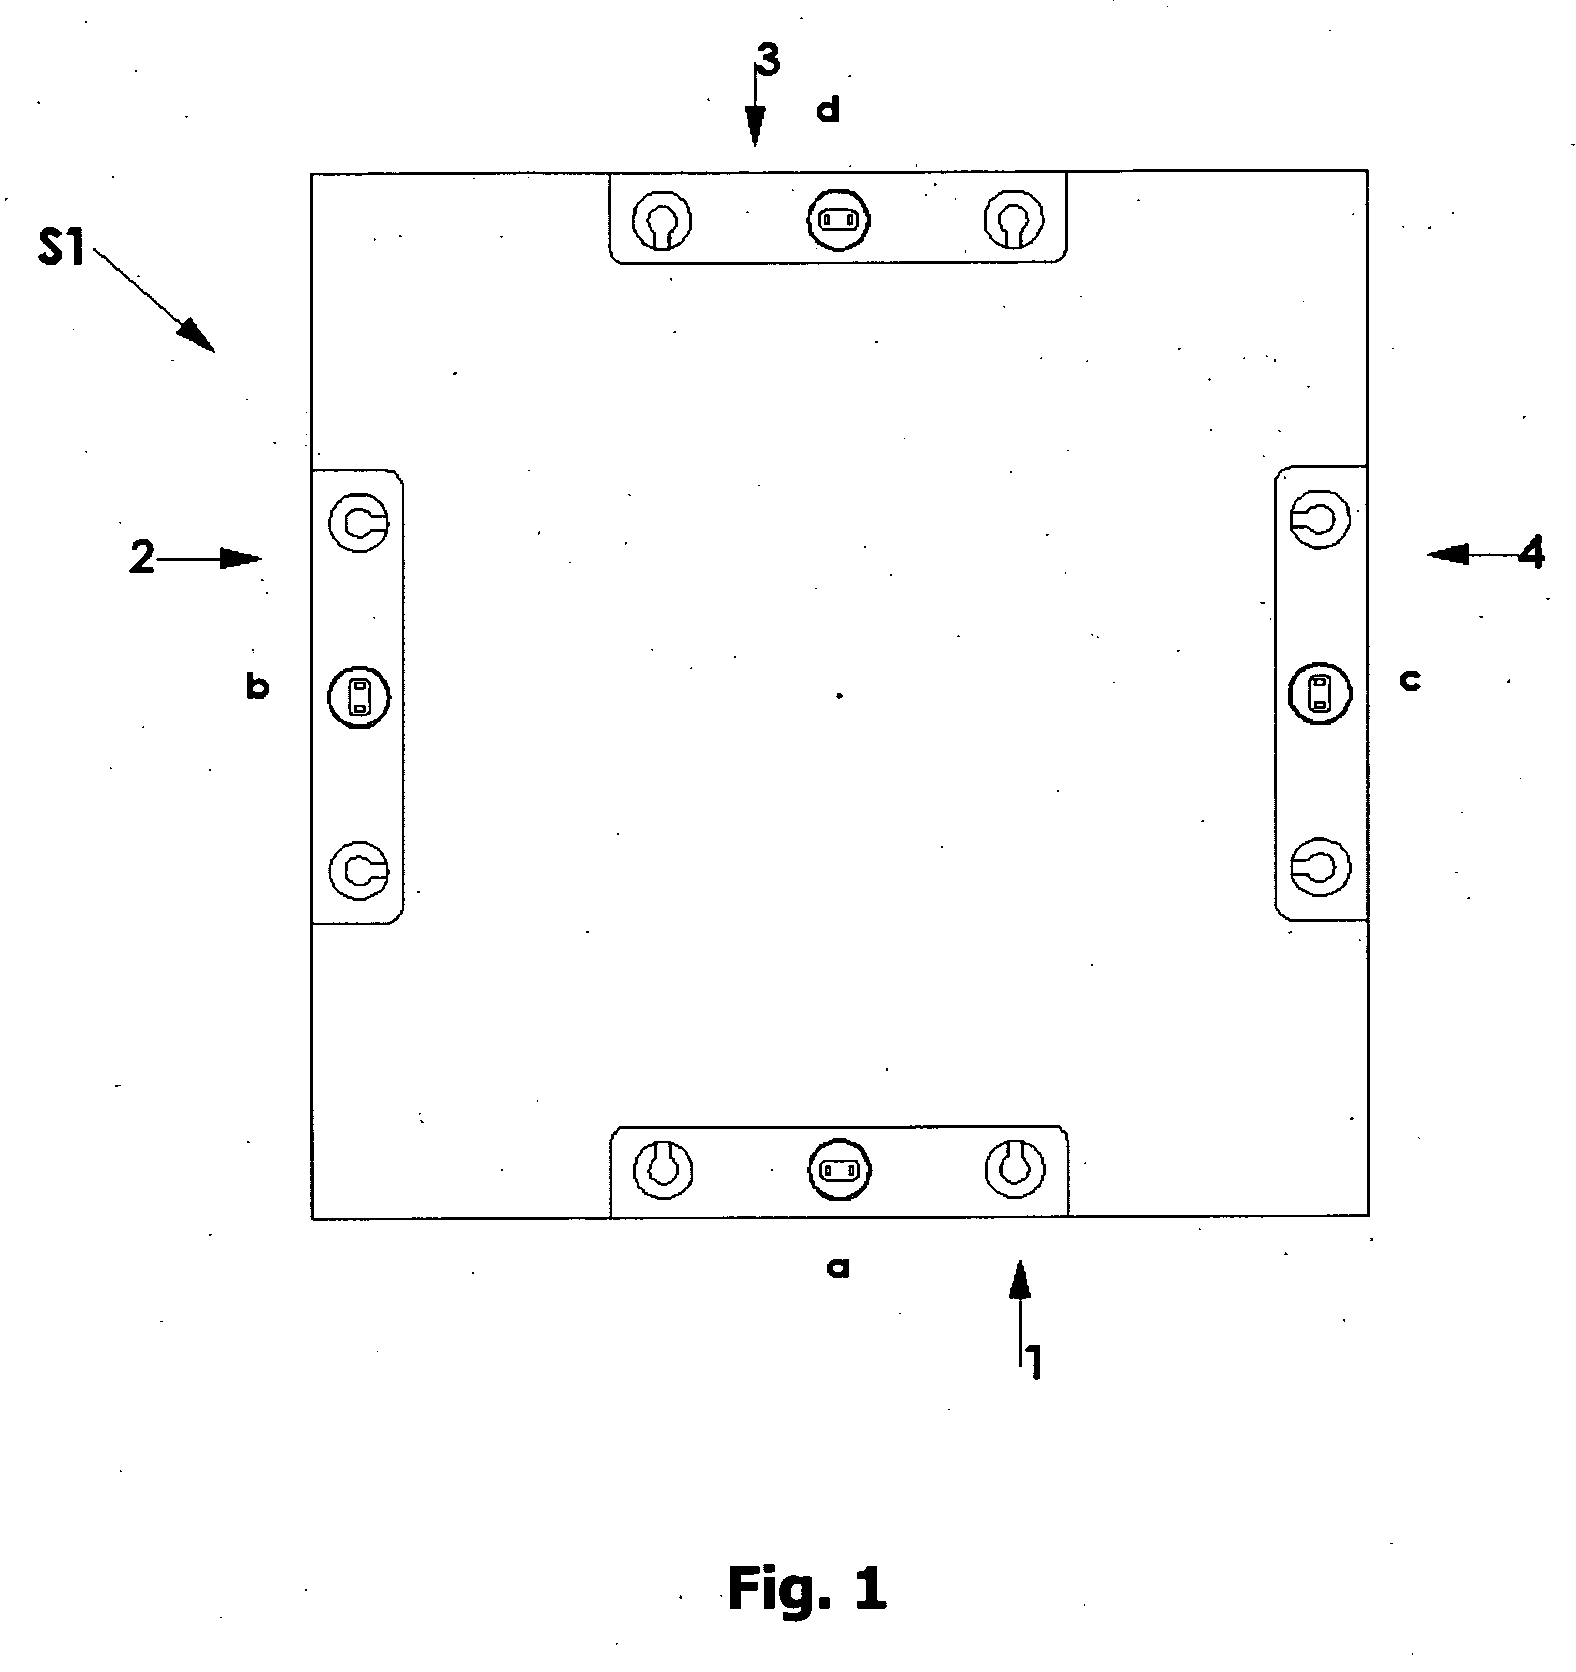 Decorative coverage and snow melting system